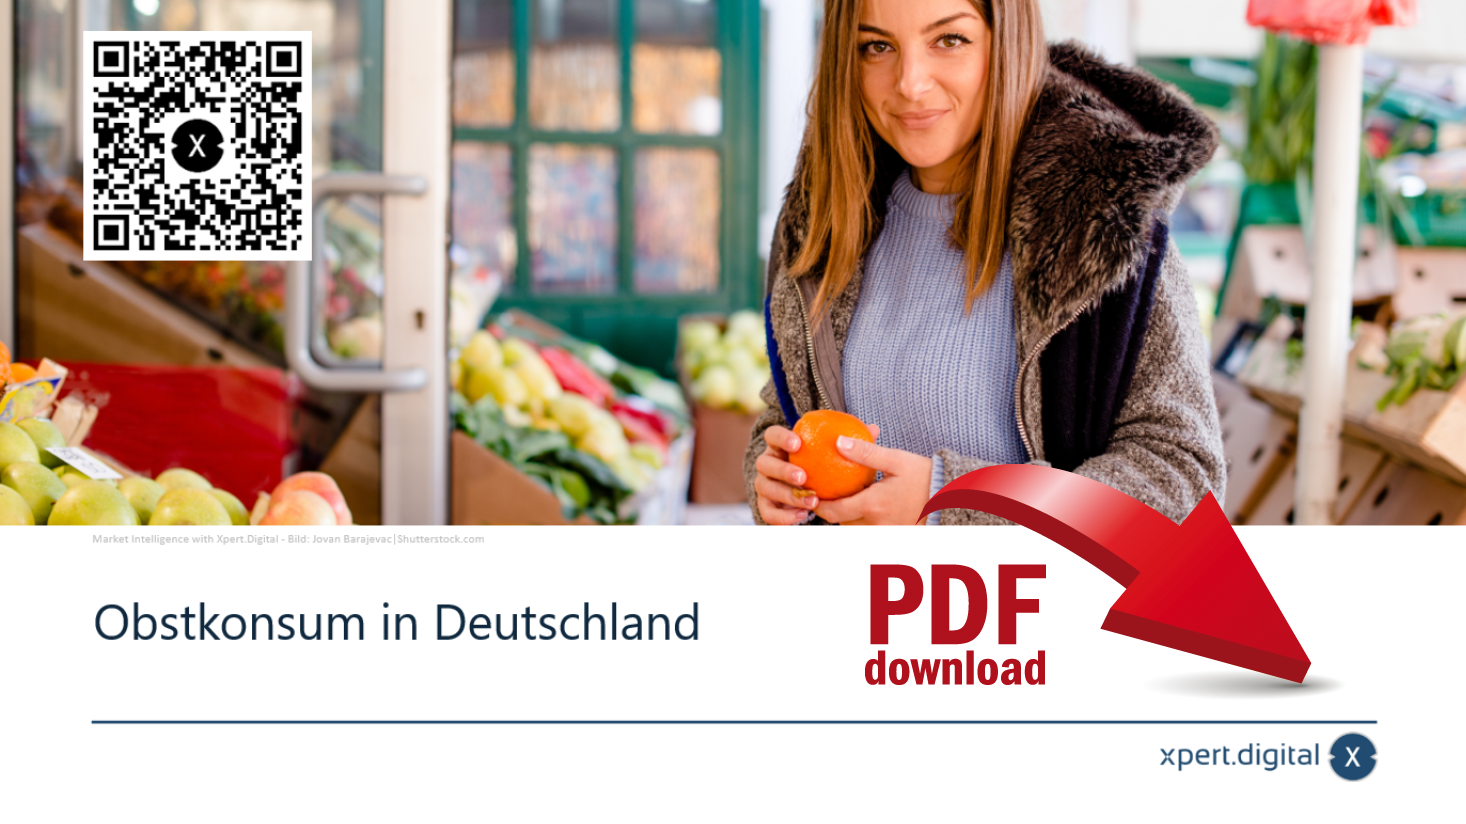 Protected: Fruit consumption in Germany